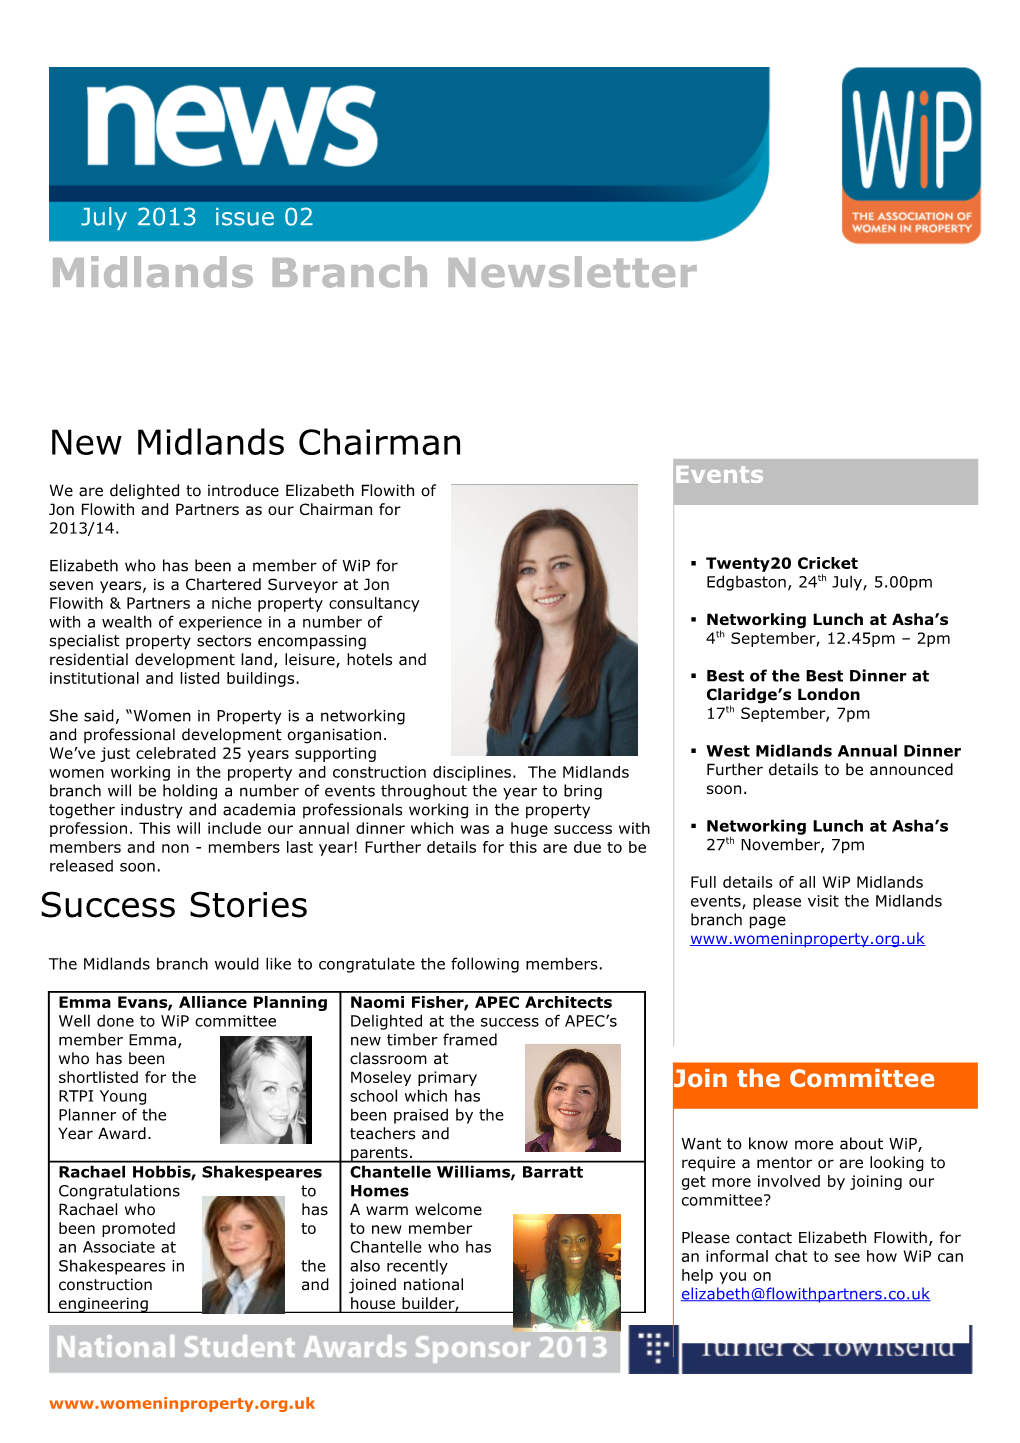 The Midlands Branch Would Like to Congratulate the Following Members